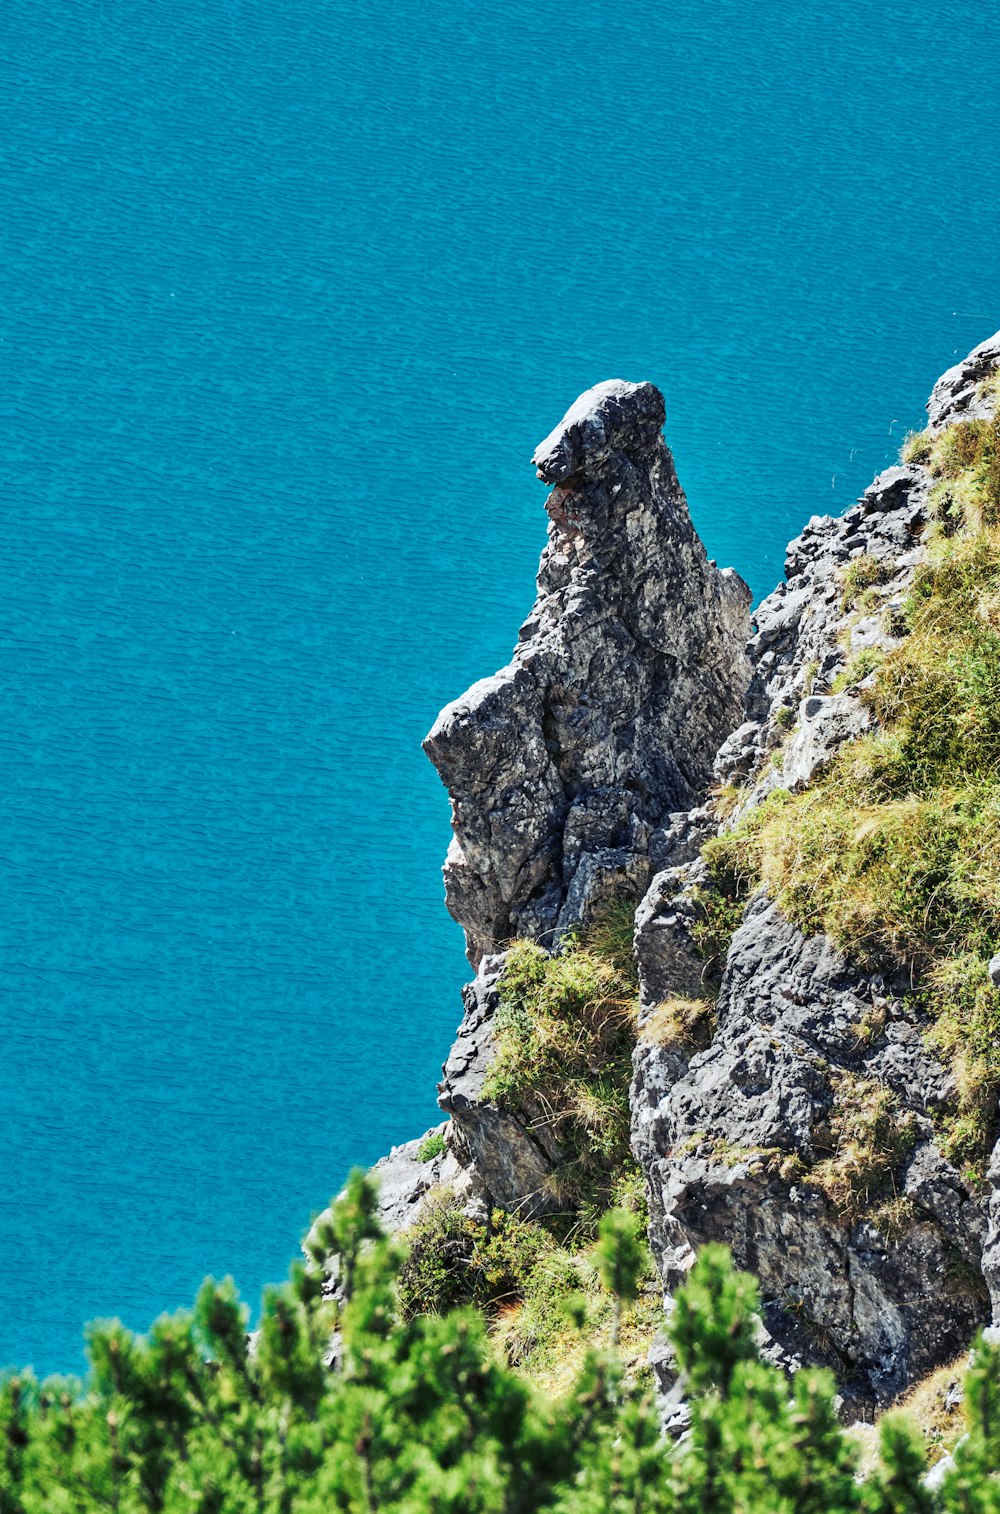 an animal standing on top of a rocky cliff next to a body of water